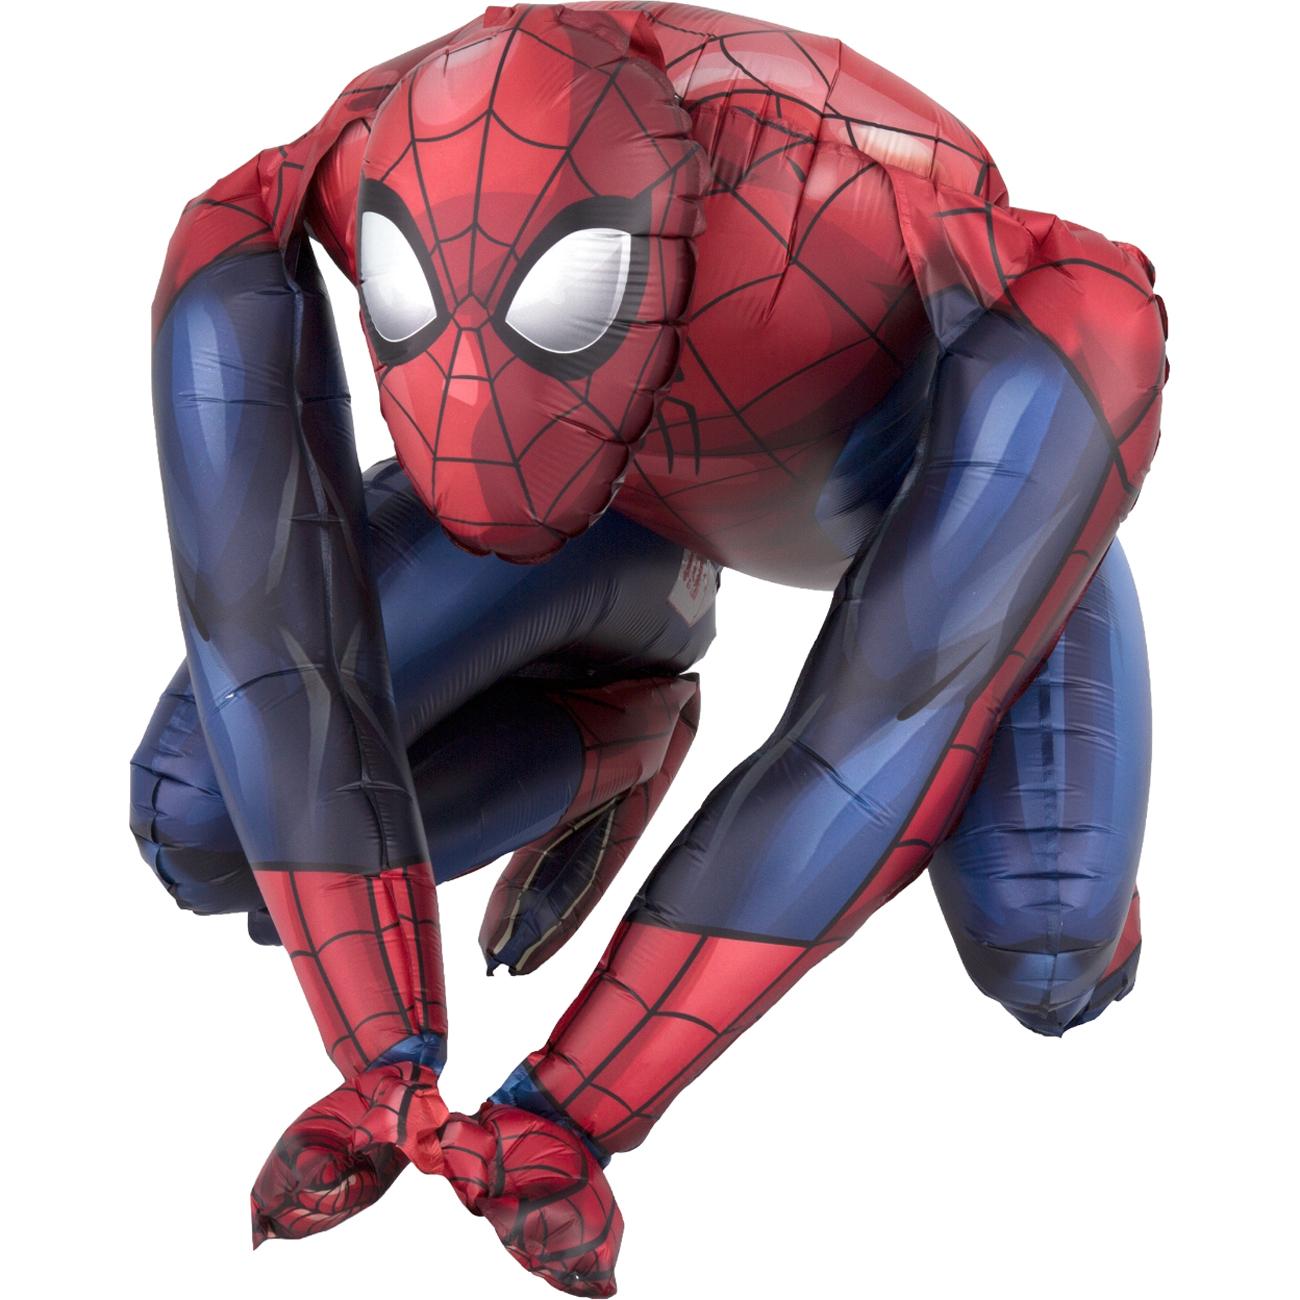 Spider-Man Sitting Foil Balloon 38cm Balloons & Streamers - Party Centre - Party Centre